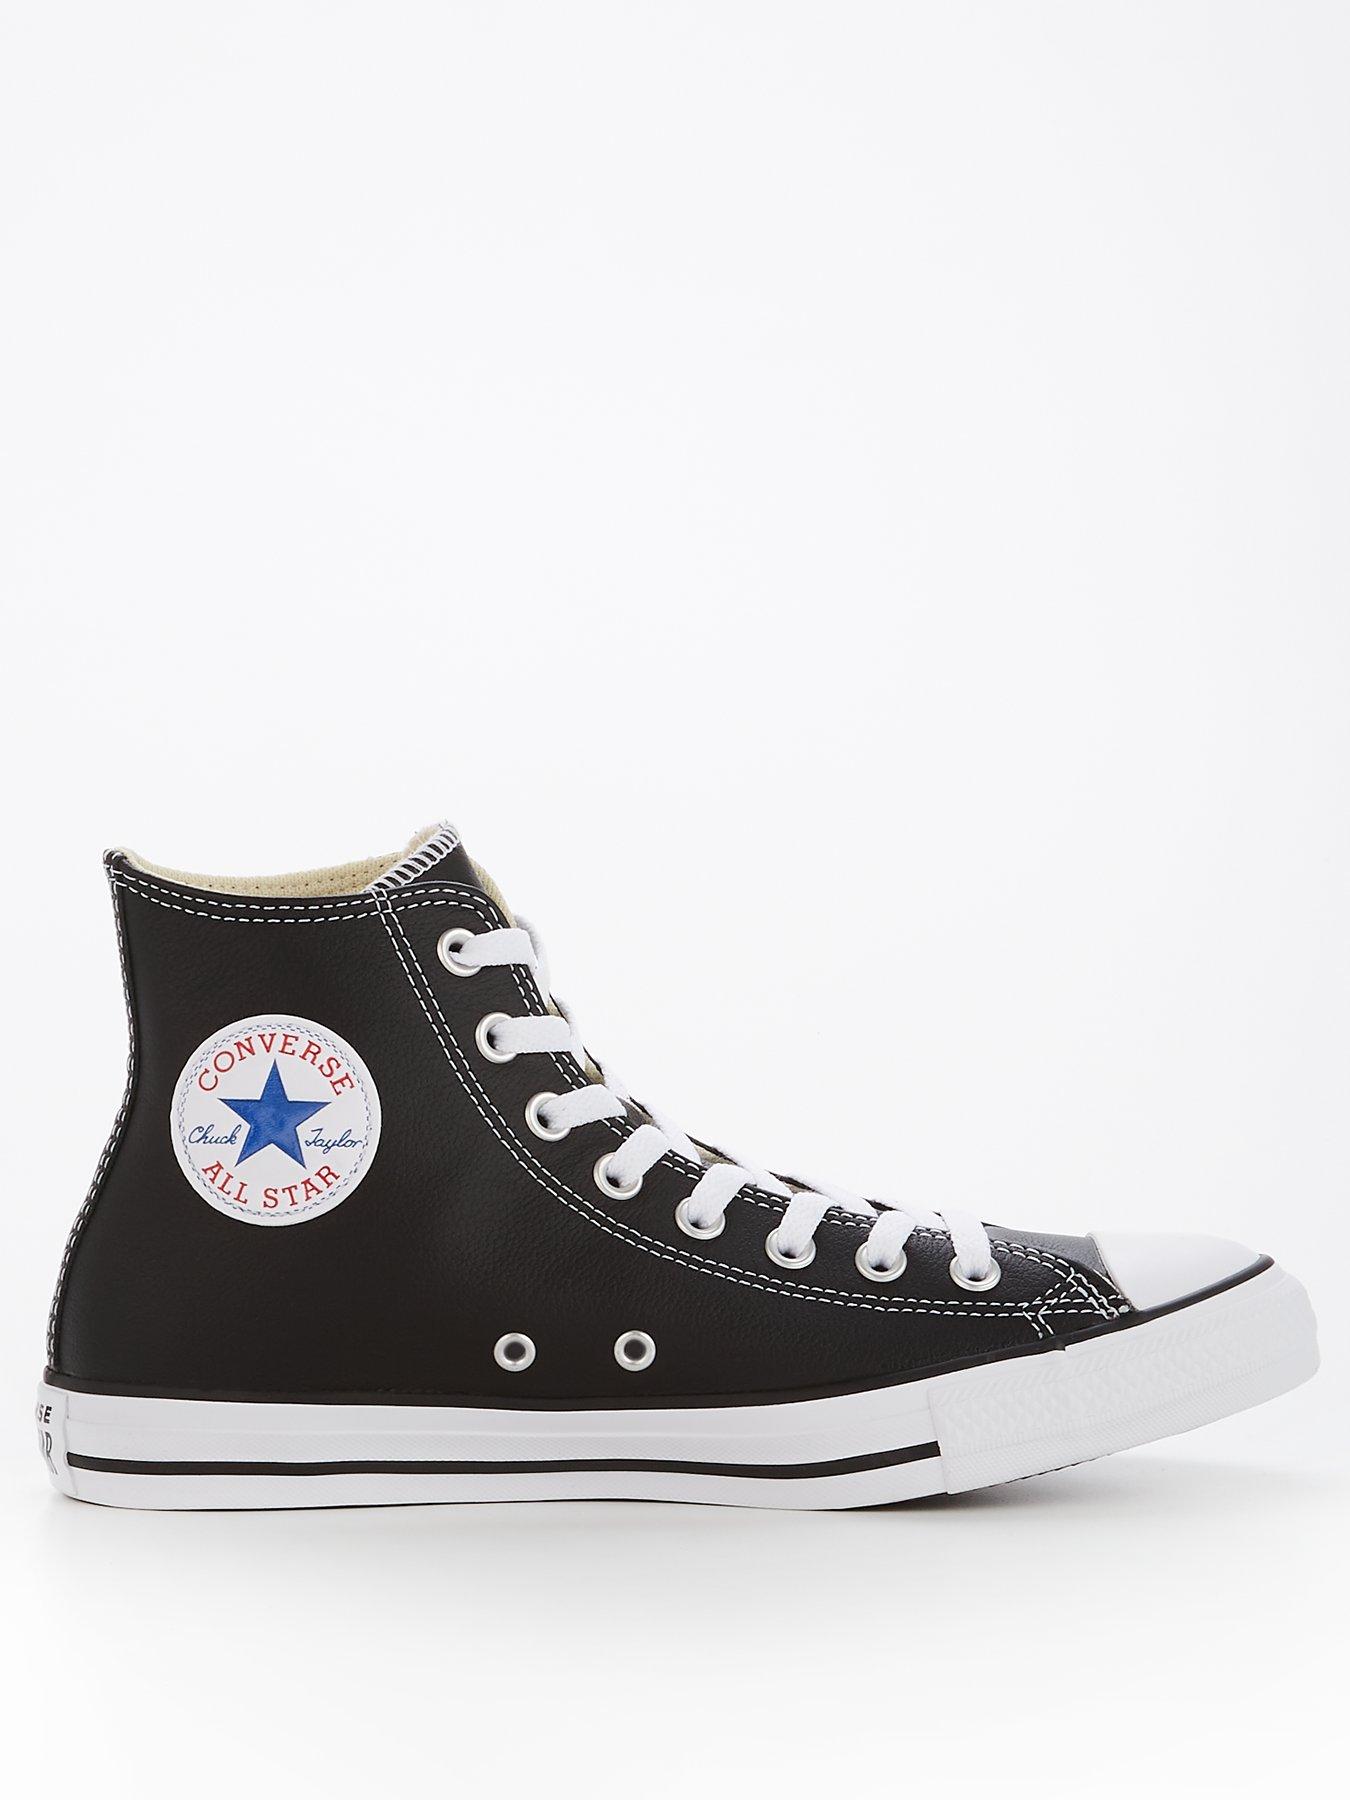 Converse Chuck Taylor All Star Leather Hi - Black | very.co.uk